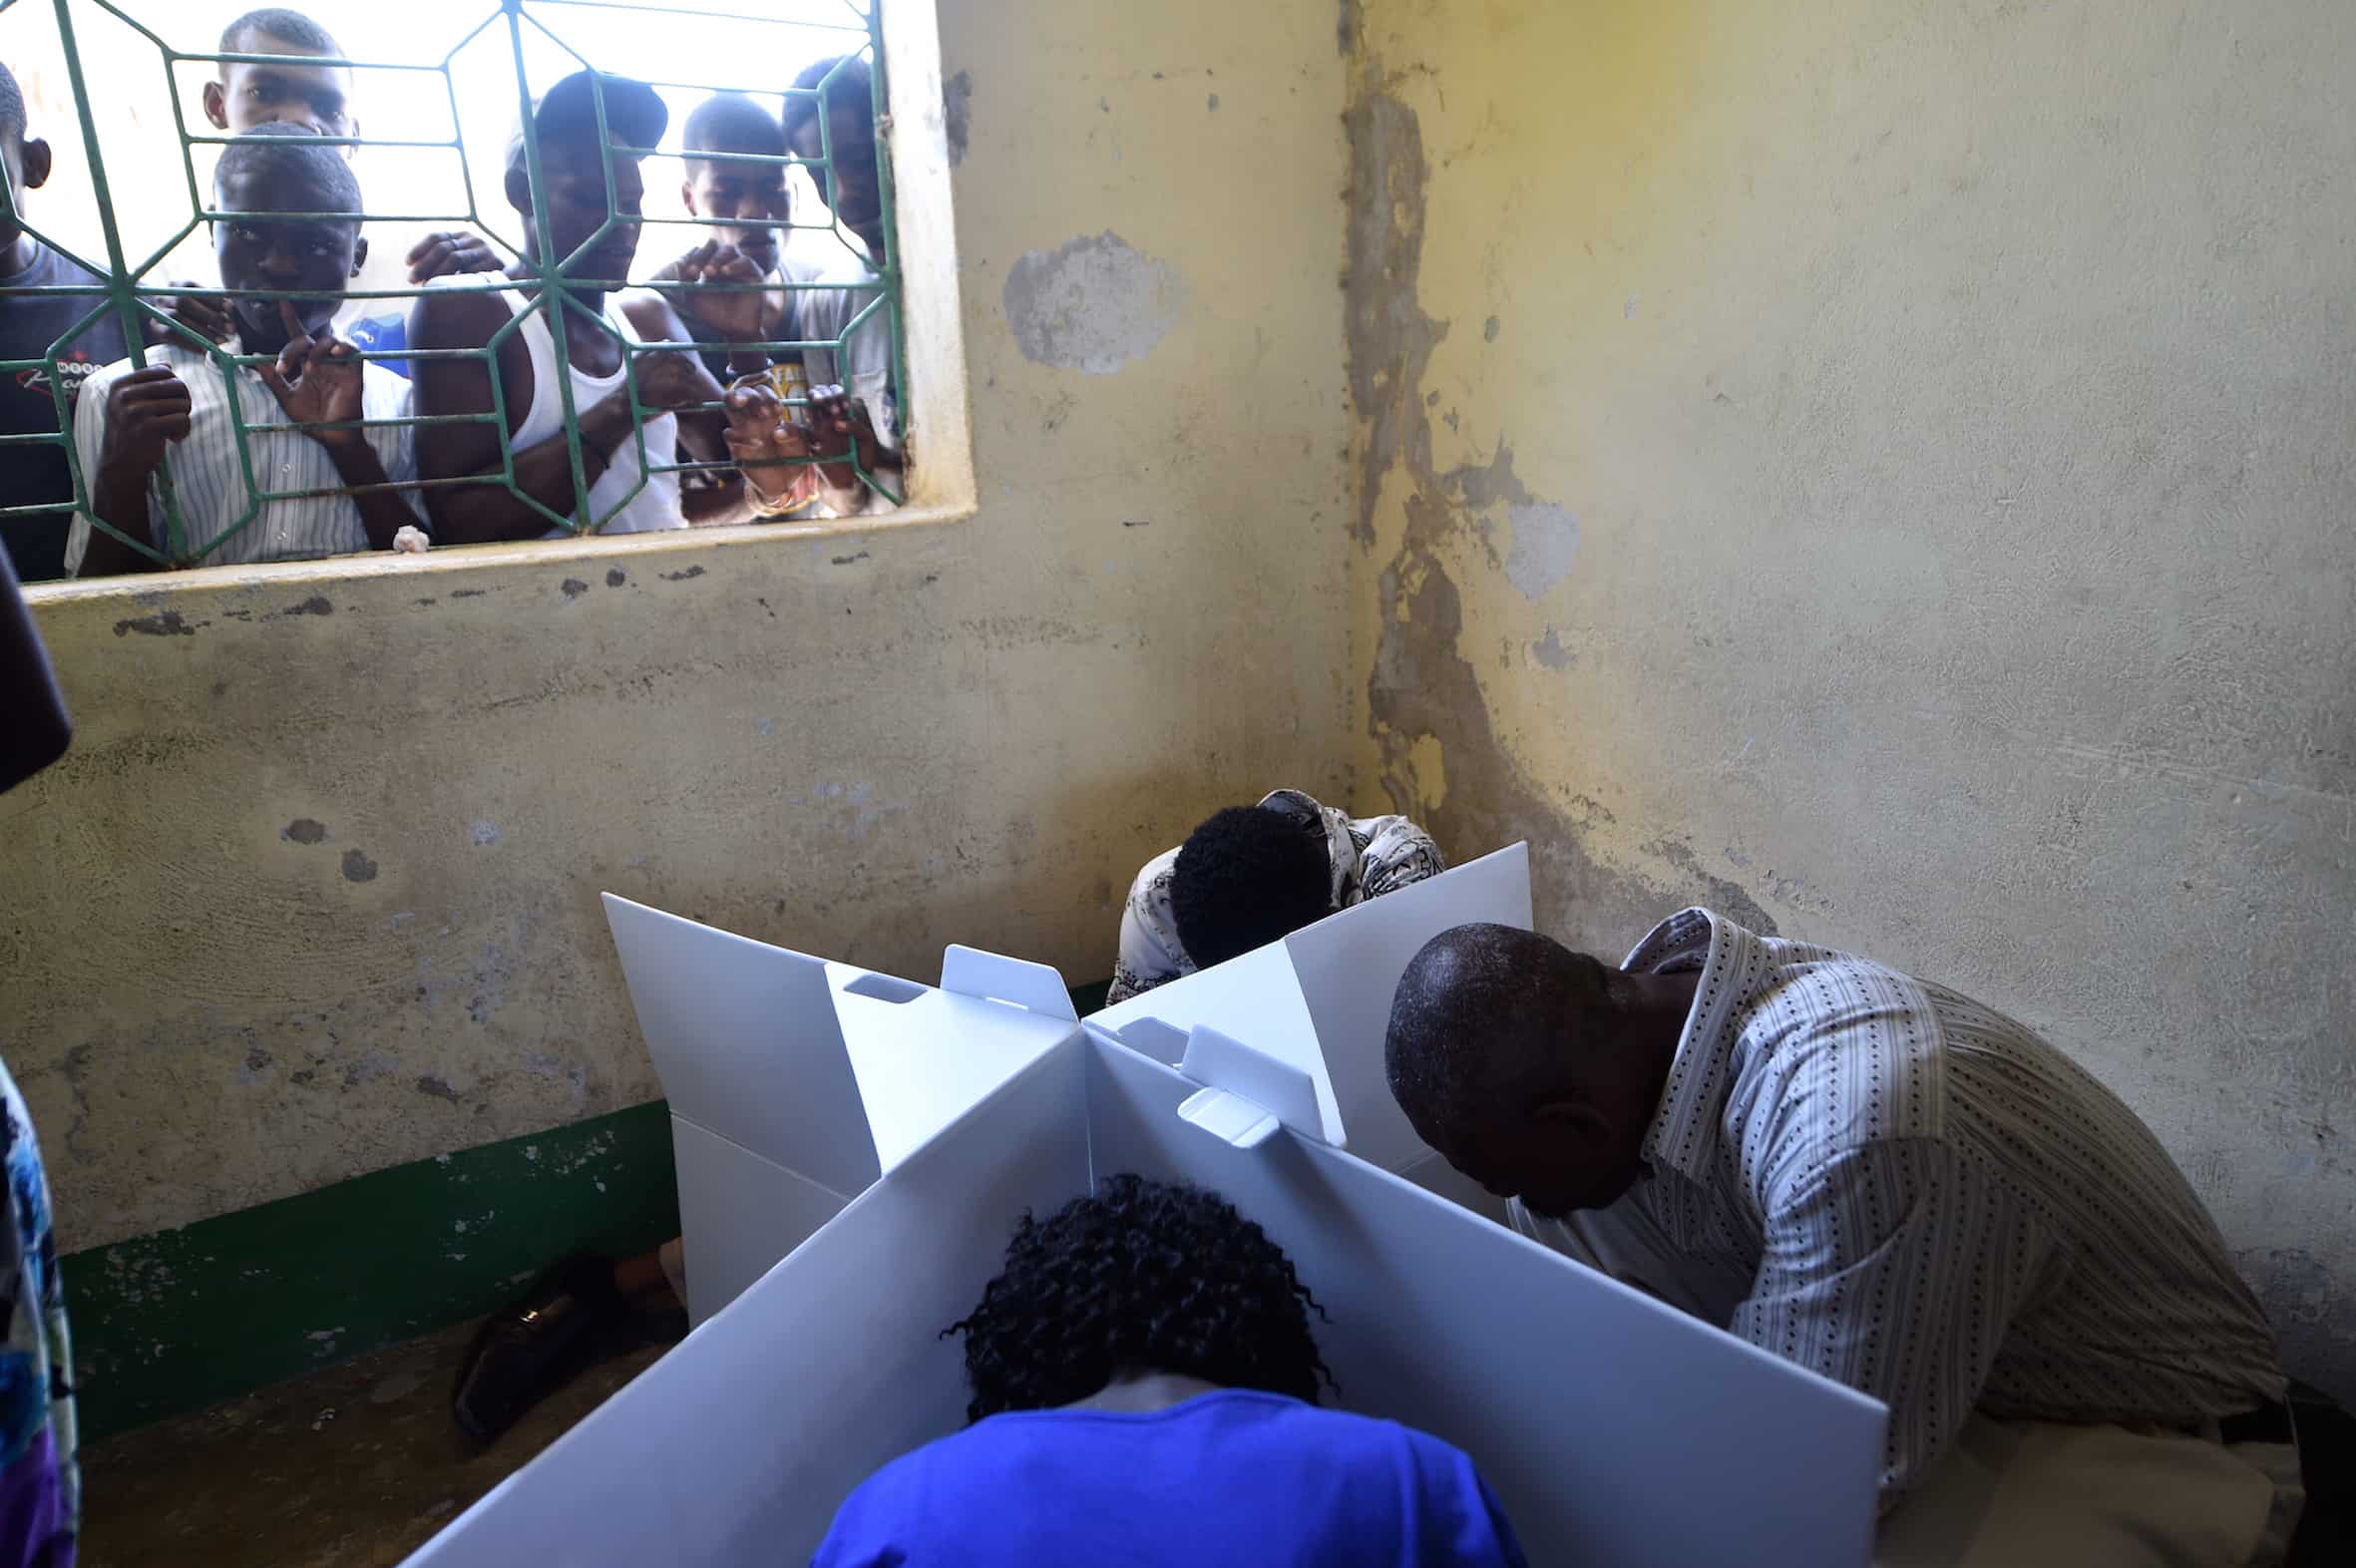 Haitians cast their ballots at a polling station during the Legislative Elections in Port-au-Prince on August 9, 2015.